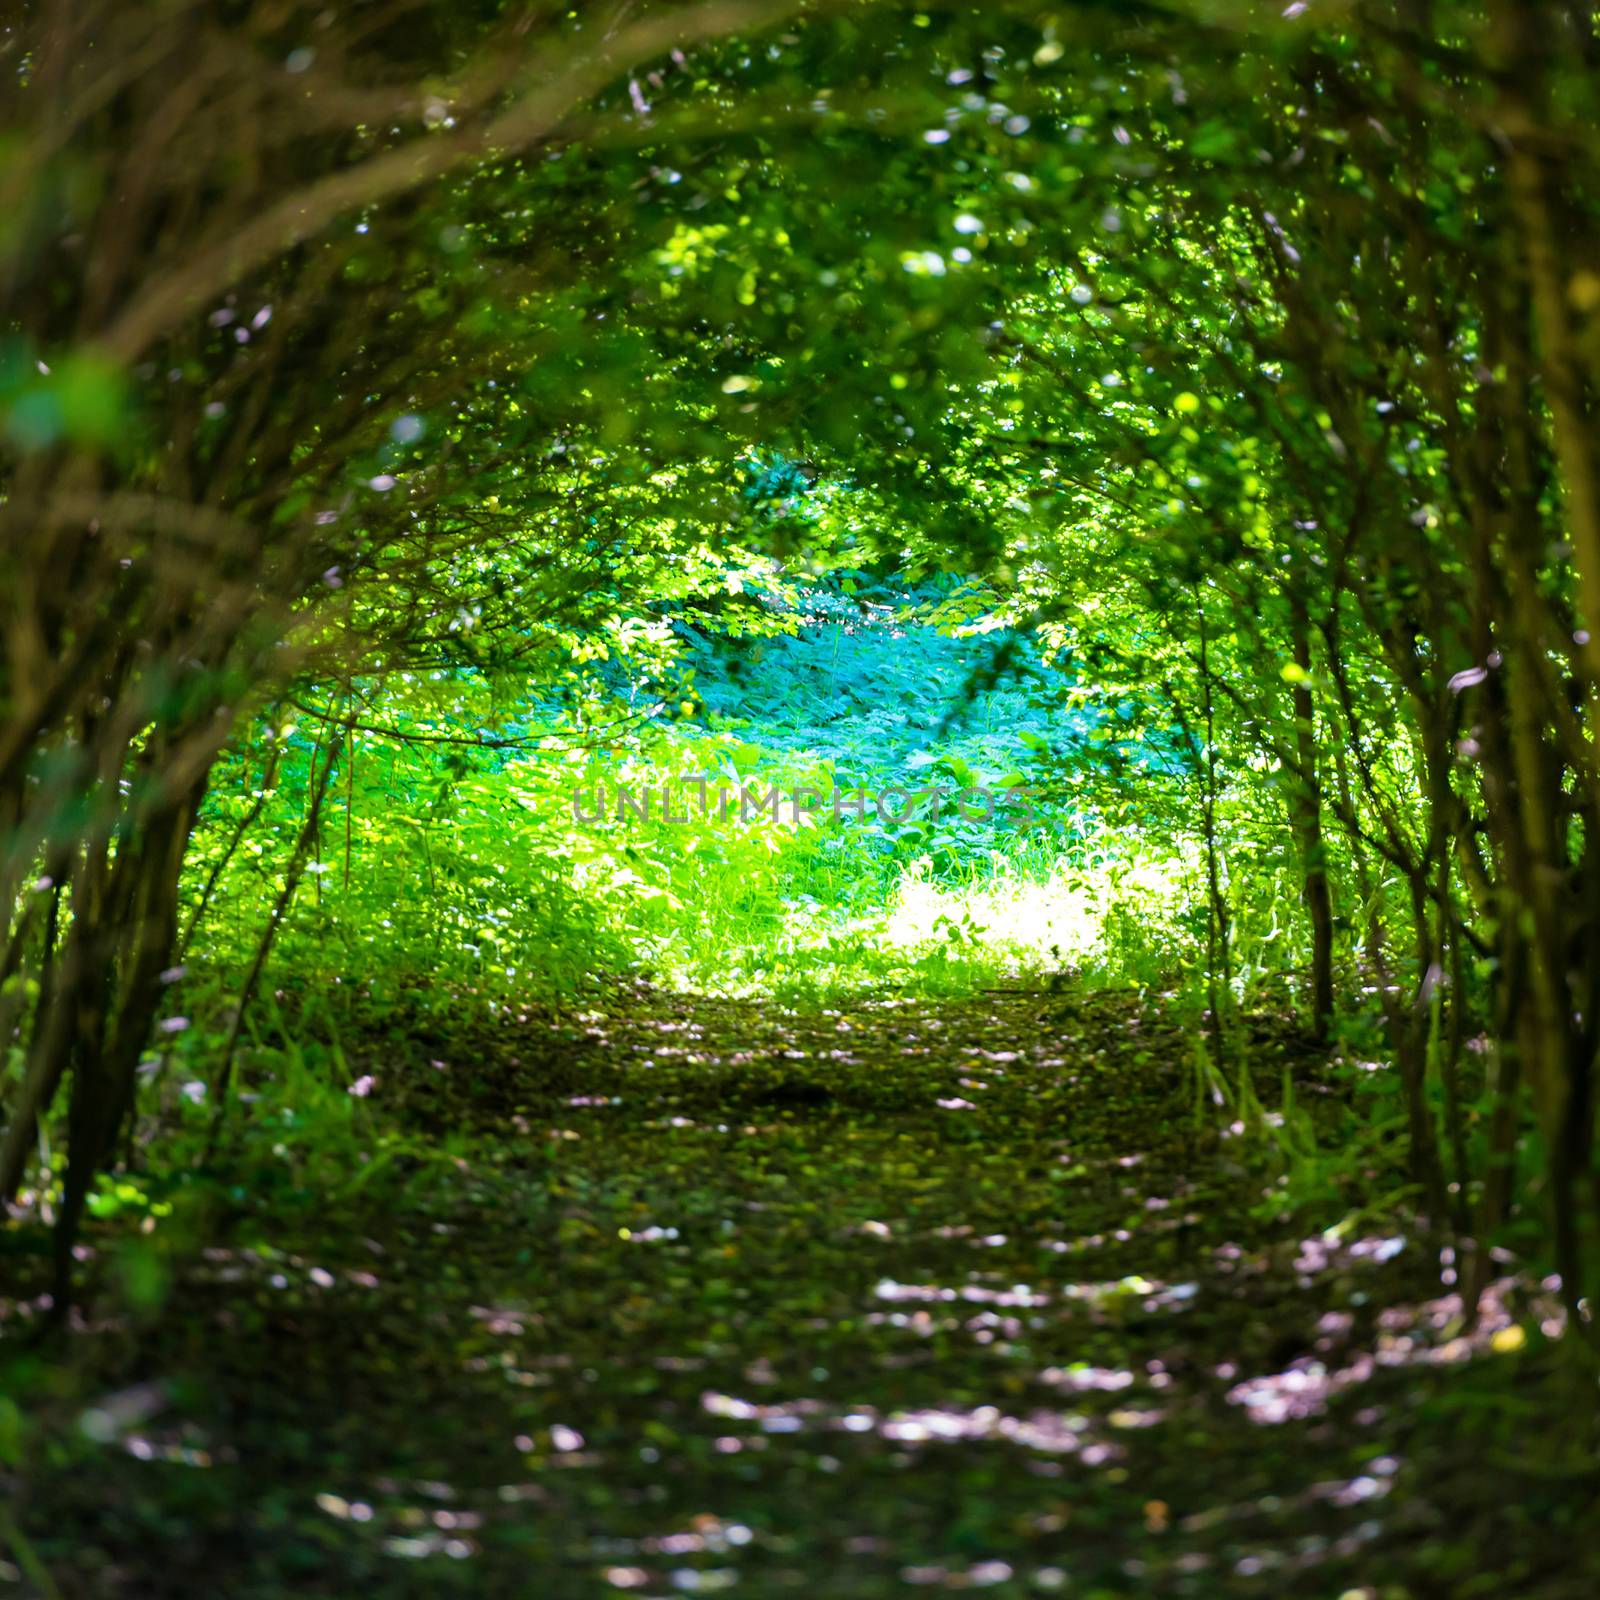 Magical forest with path to the light through dark tunnel of trees